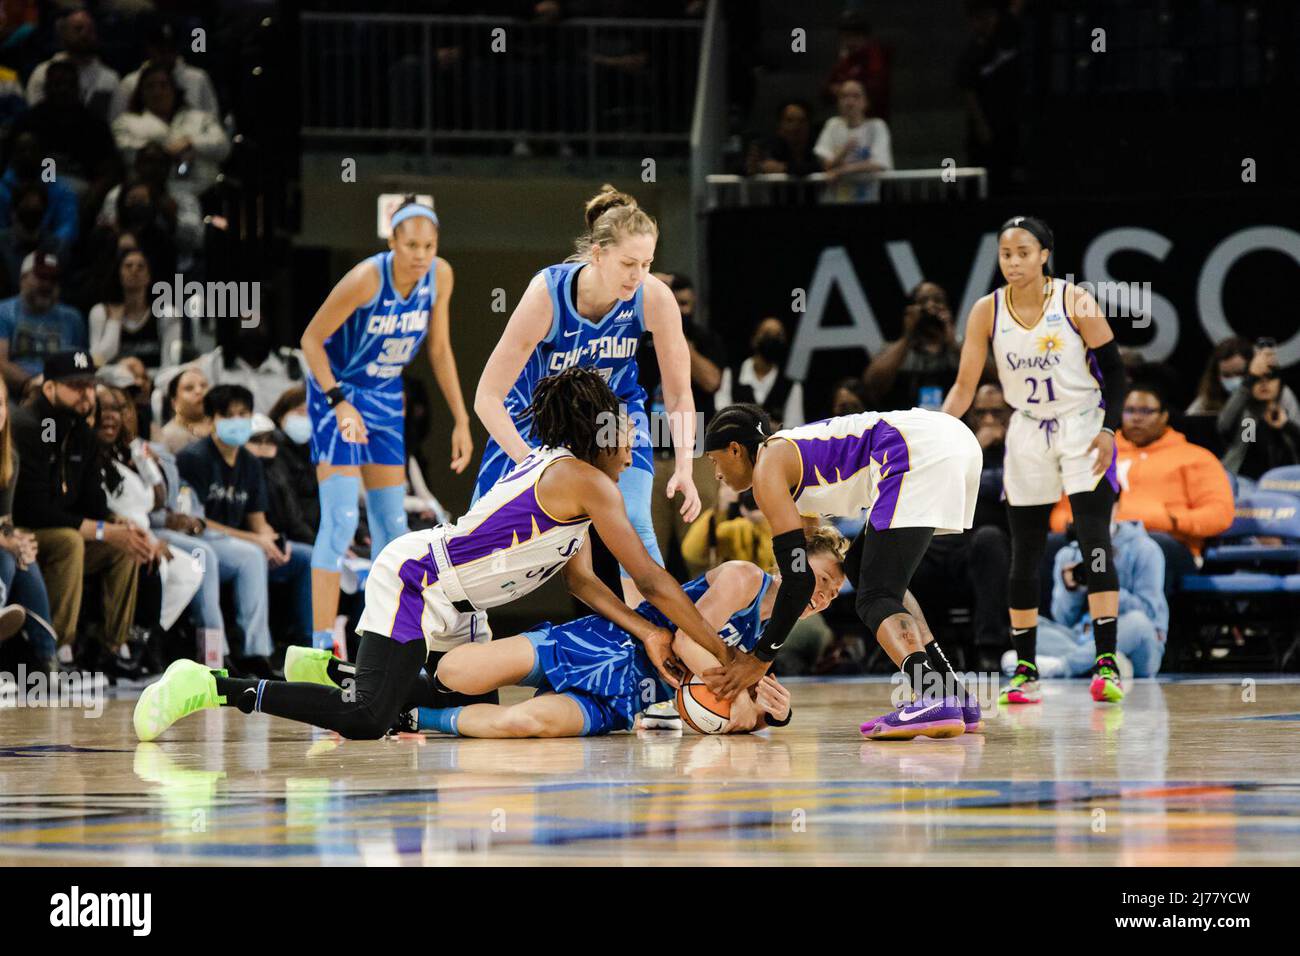 Brittney Sykes (15 Los Angeles Sparks) and Nneka Ogwumike (30 Los Angeles Sparks) try to steal the ball during the WNBA basketball game between the Chicago Sky and Los Angeles Sparks on Friday May 6th, 2022 at Wintrust Arena, Chicago, USA. (NO COMMERCIAL USAGE)  Shaina Benhiyoun/SPP Stock Photo